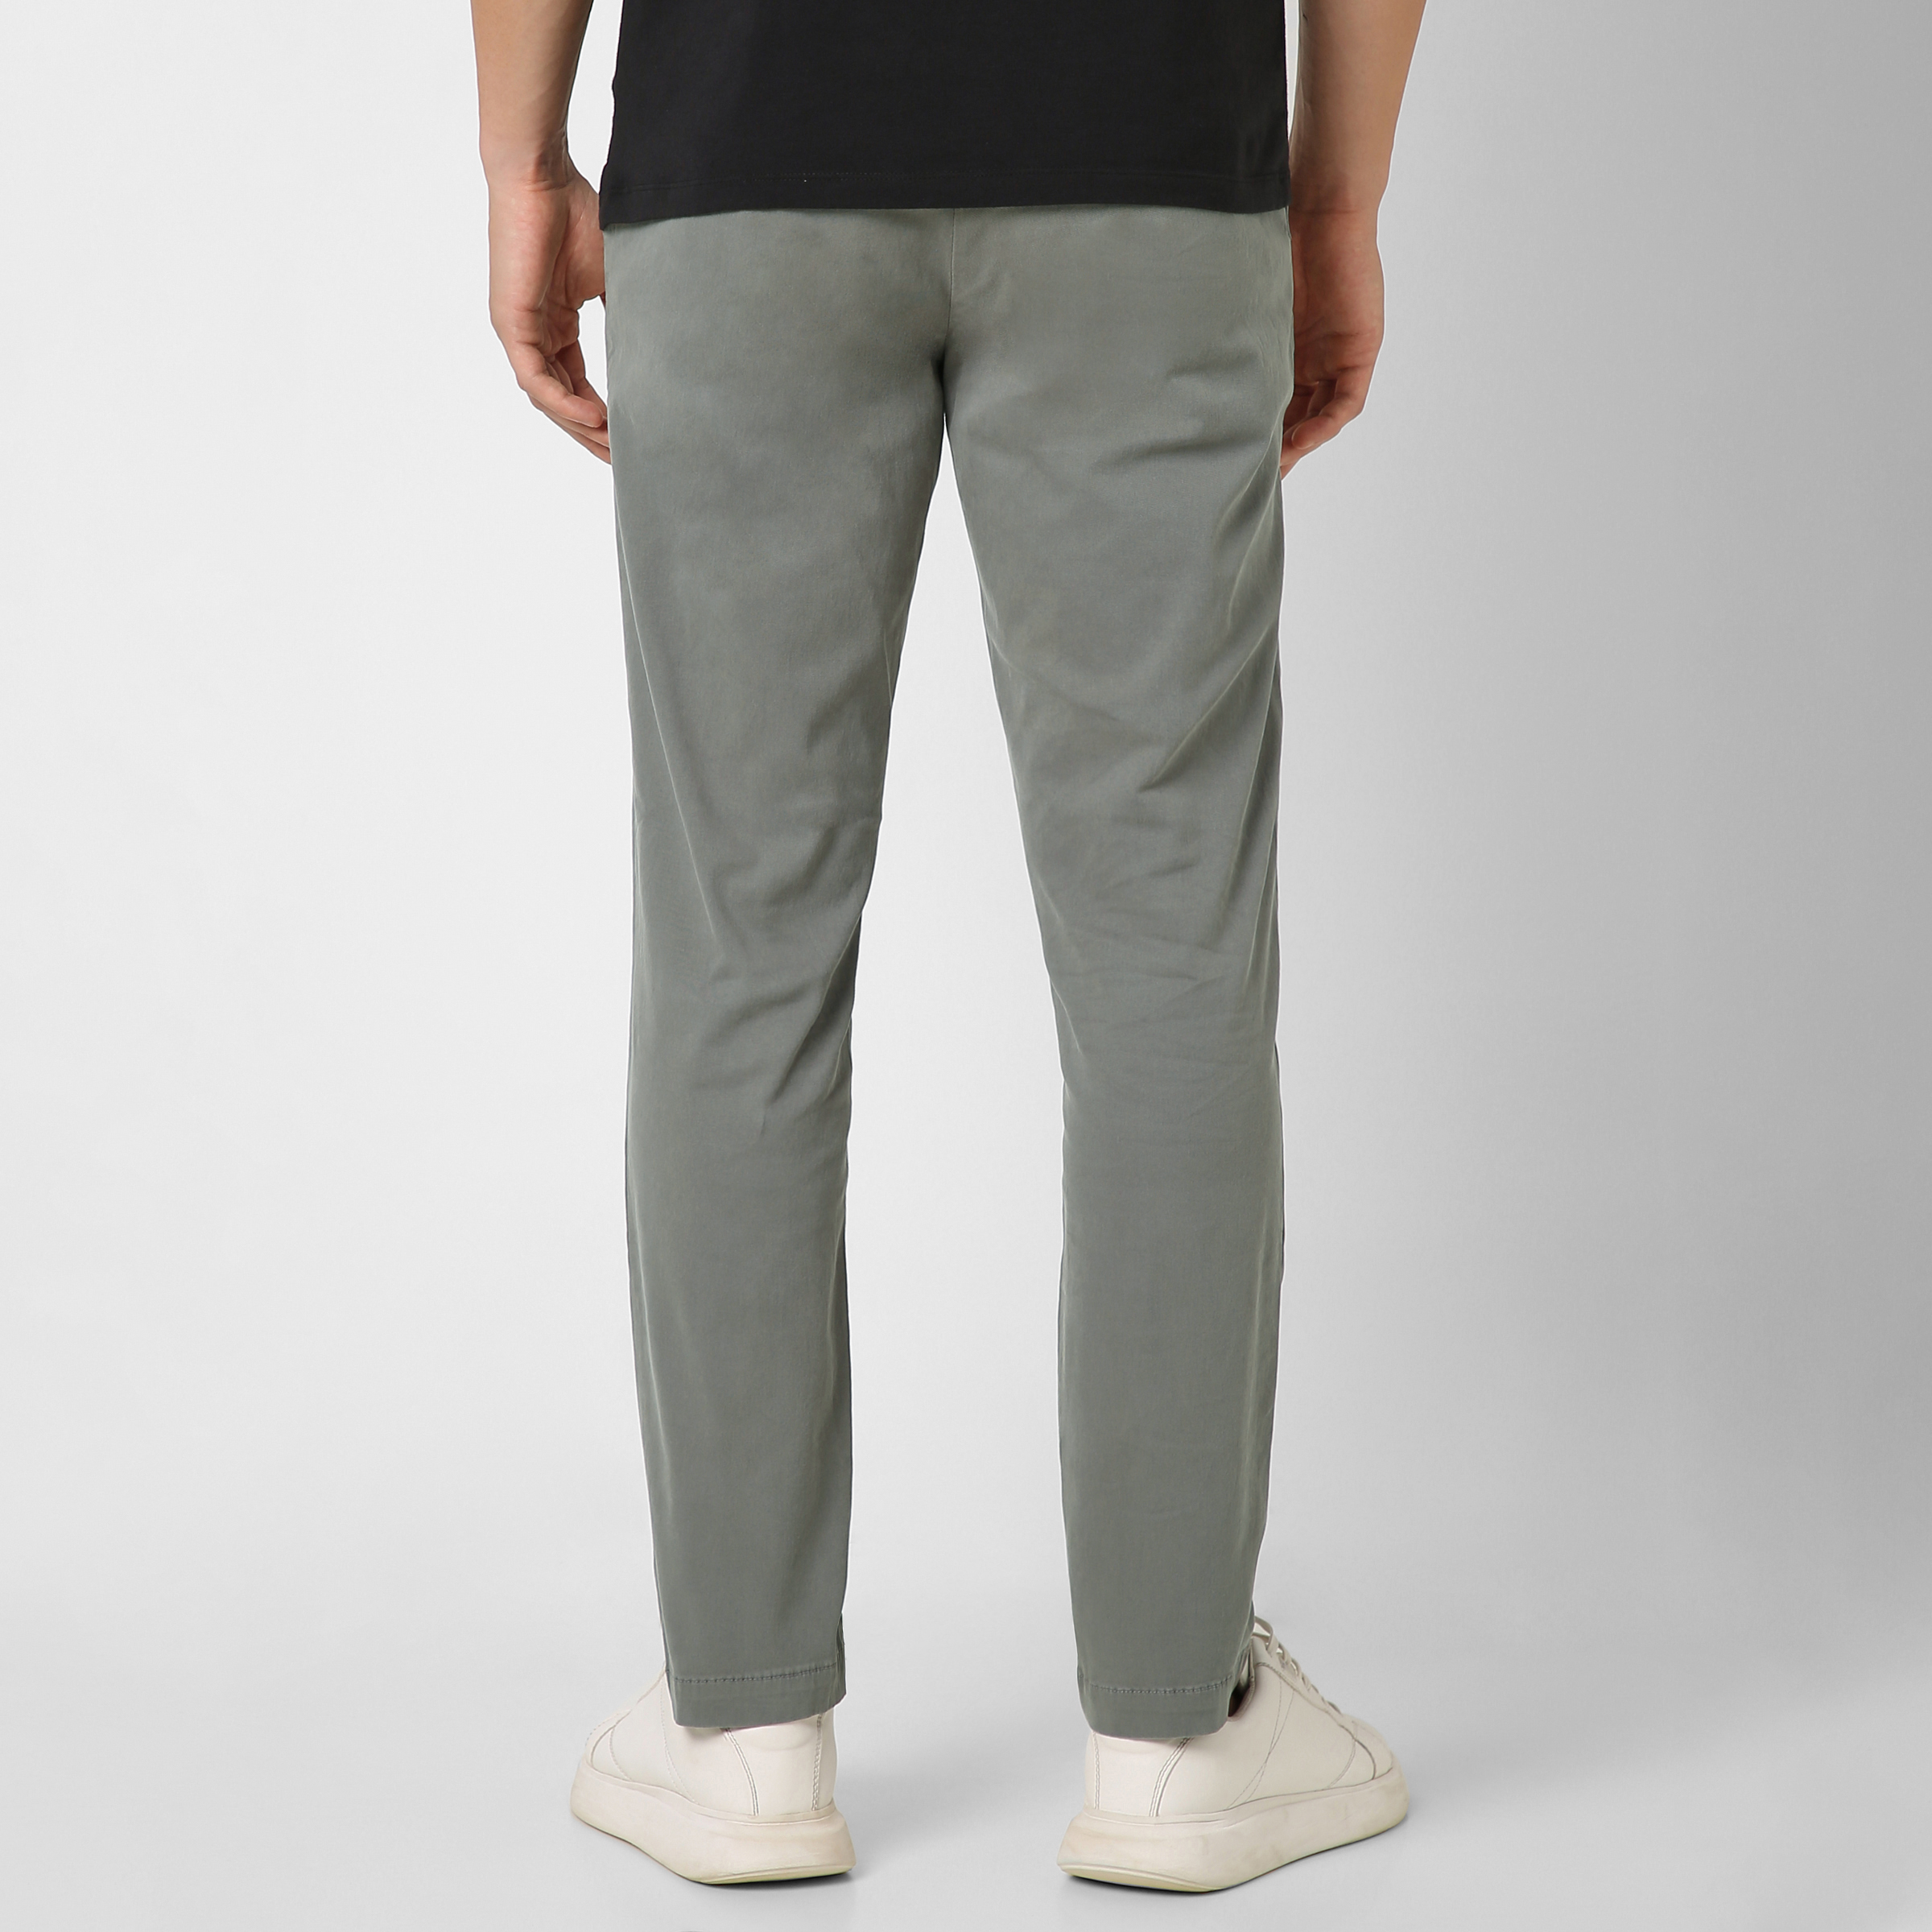 Stretch Chino Pant Grey back on model